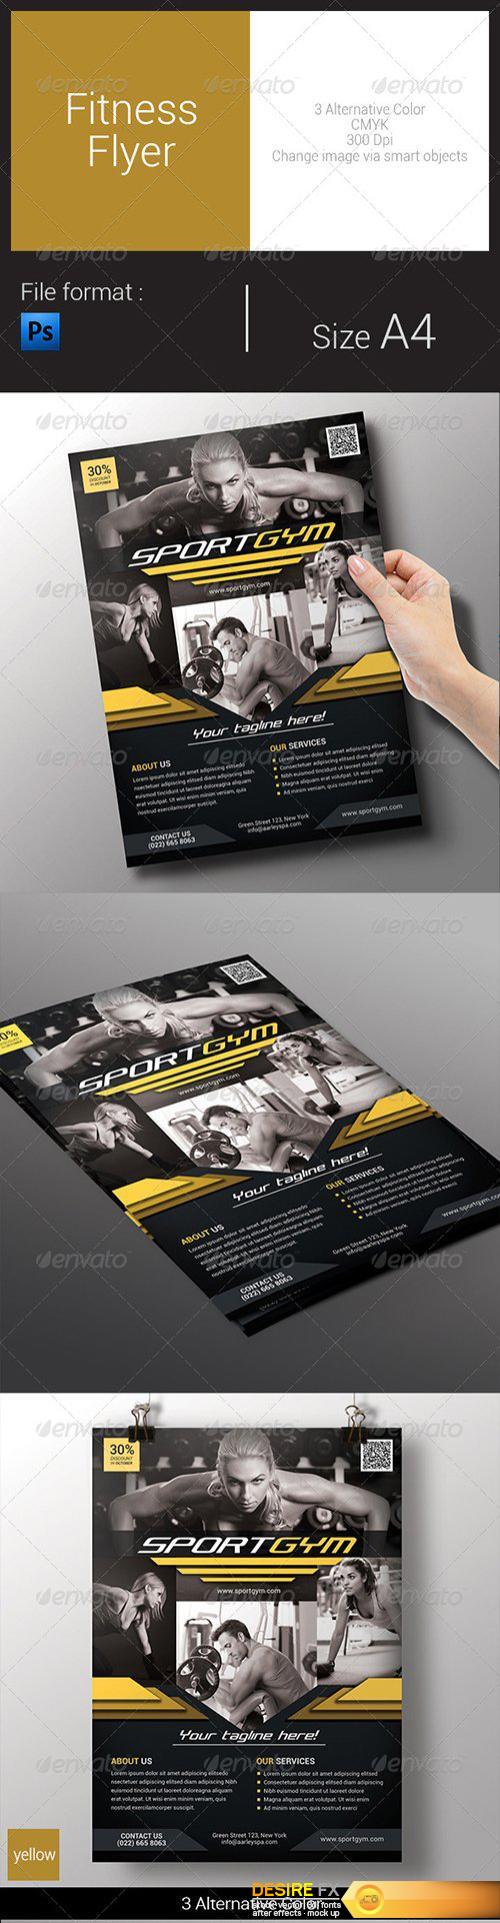 Graphicriver - Fitness Flyer 8558472